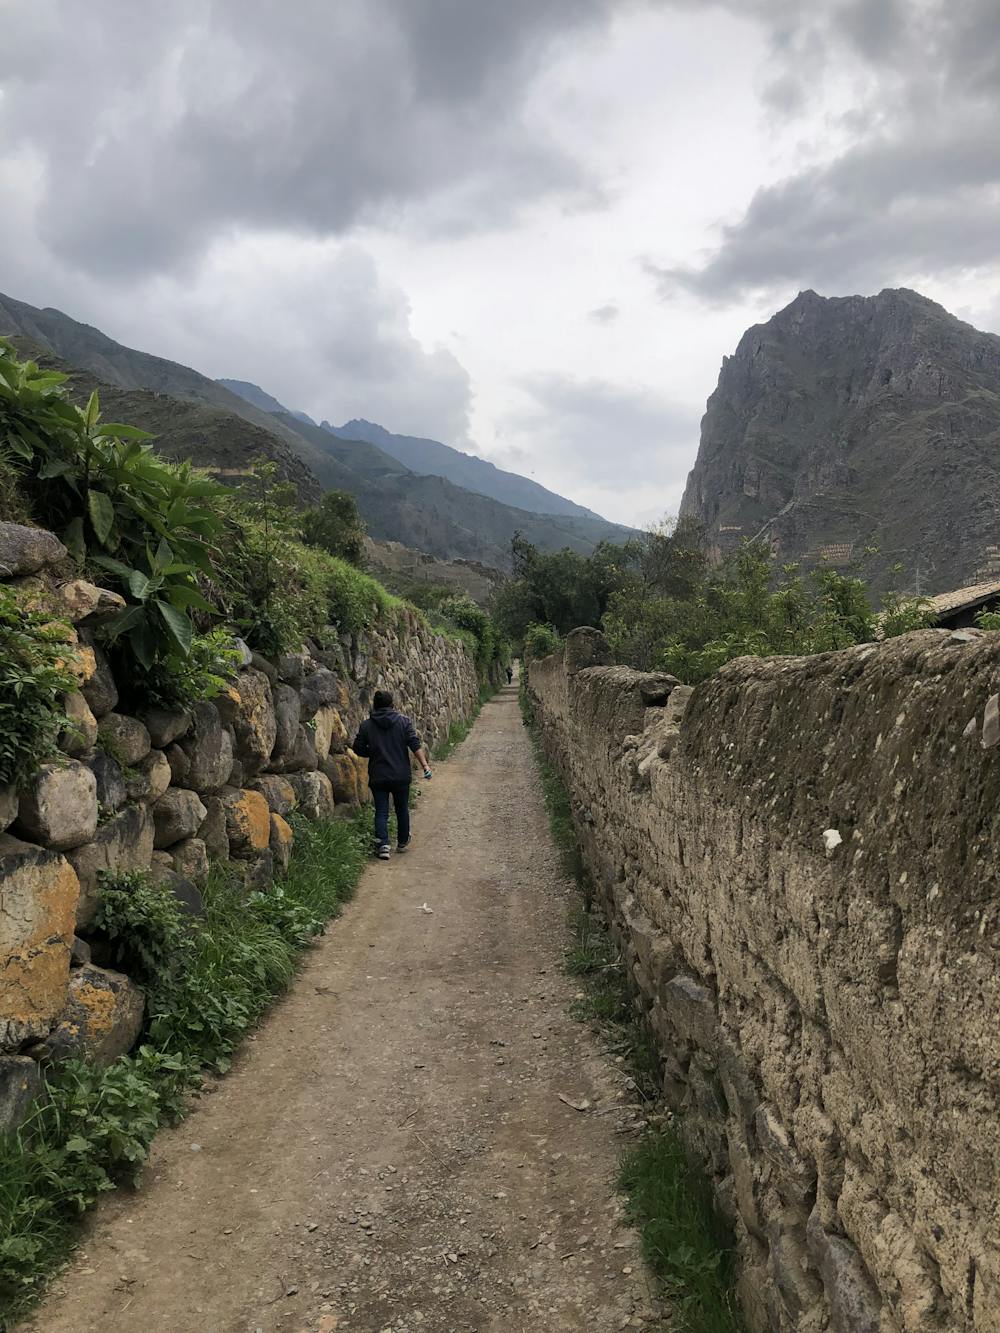 Entering Ollantaytambo with the Fortress in the background